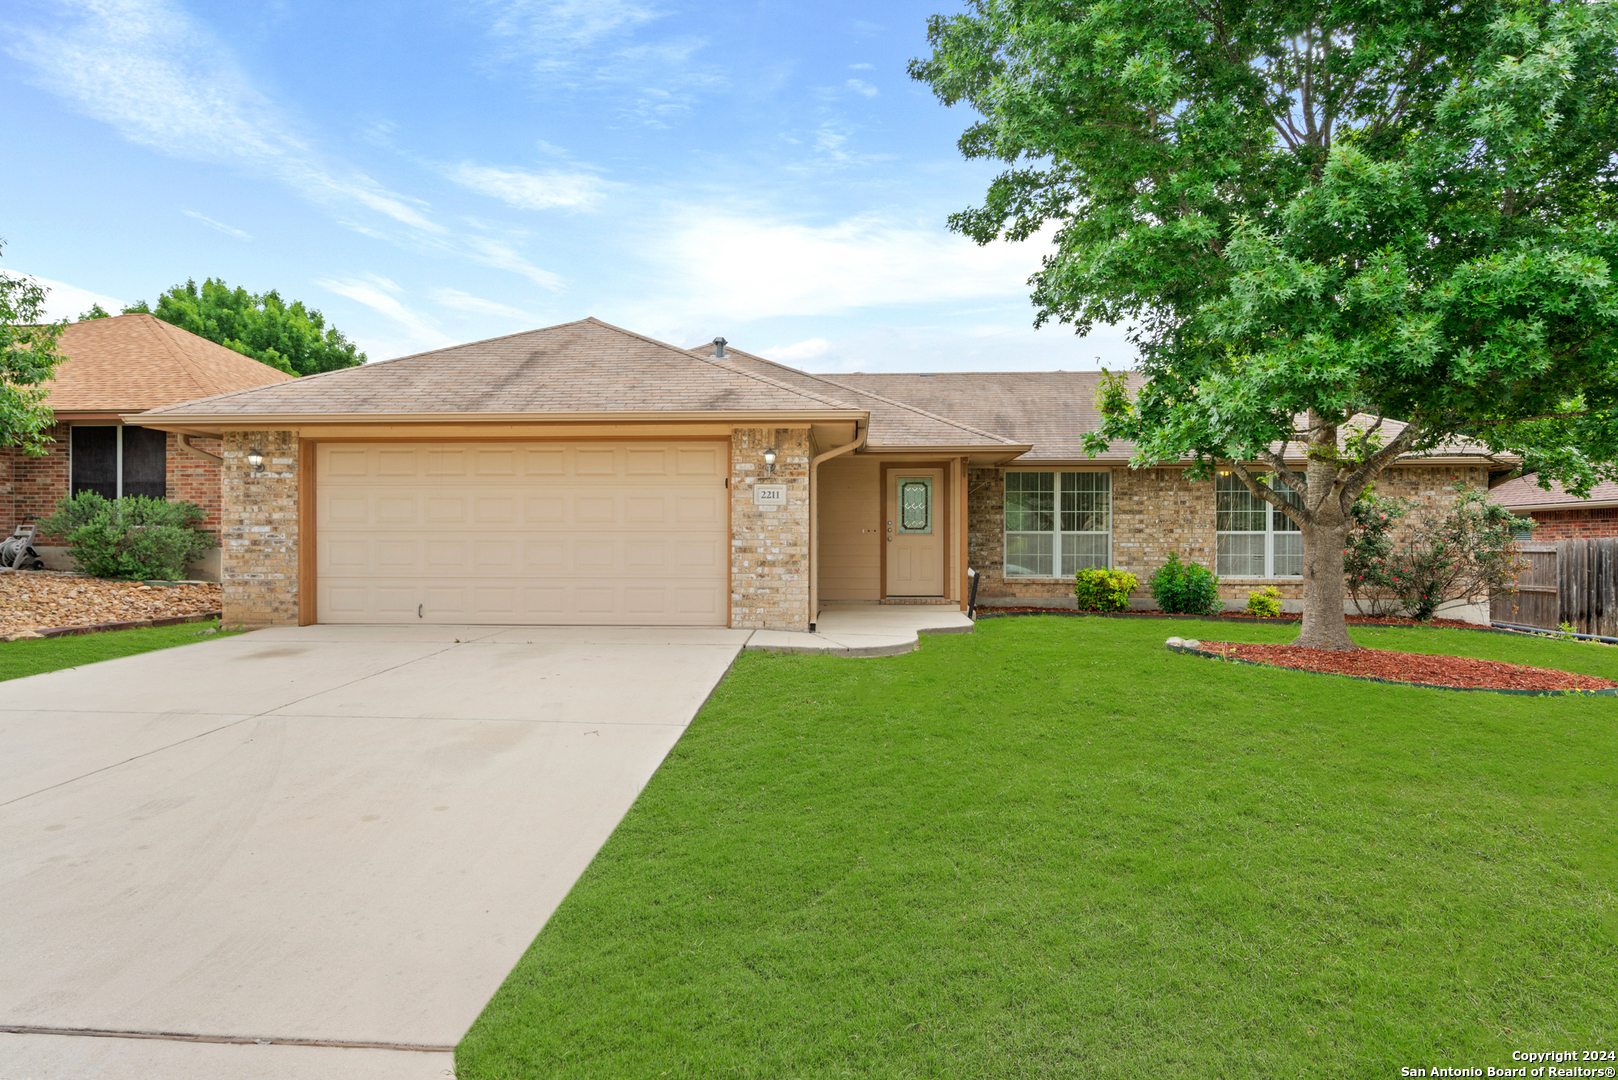 Photo of 2211 Stonehaven in New Braunfels, TX